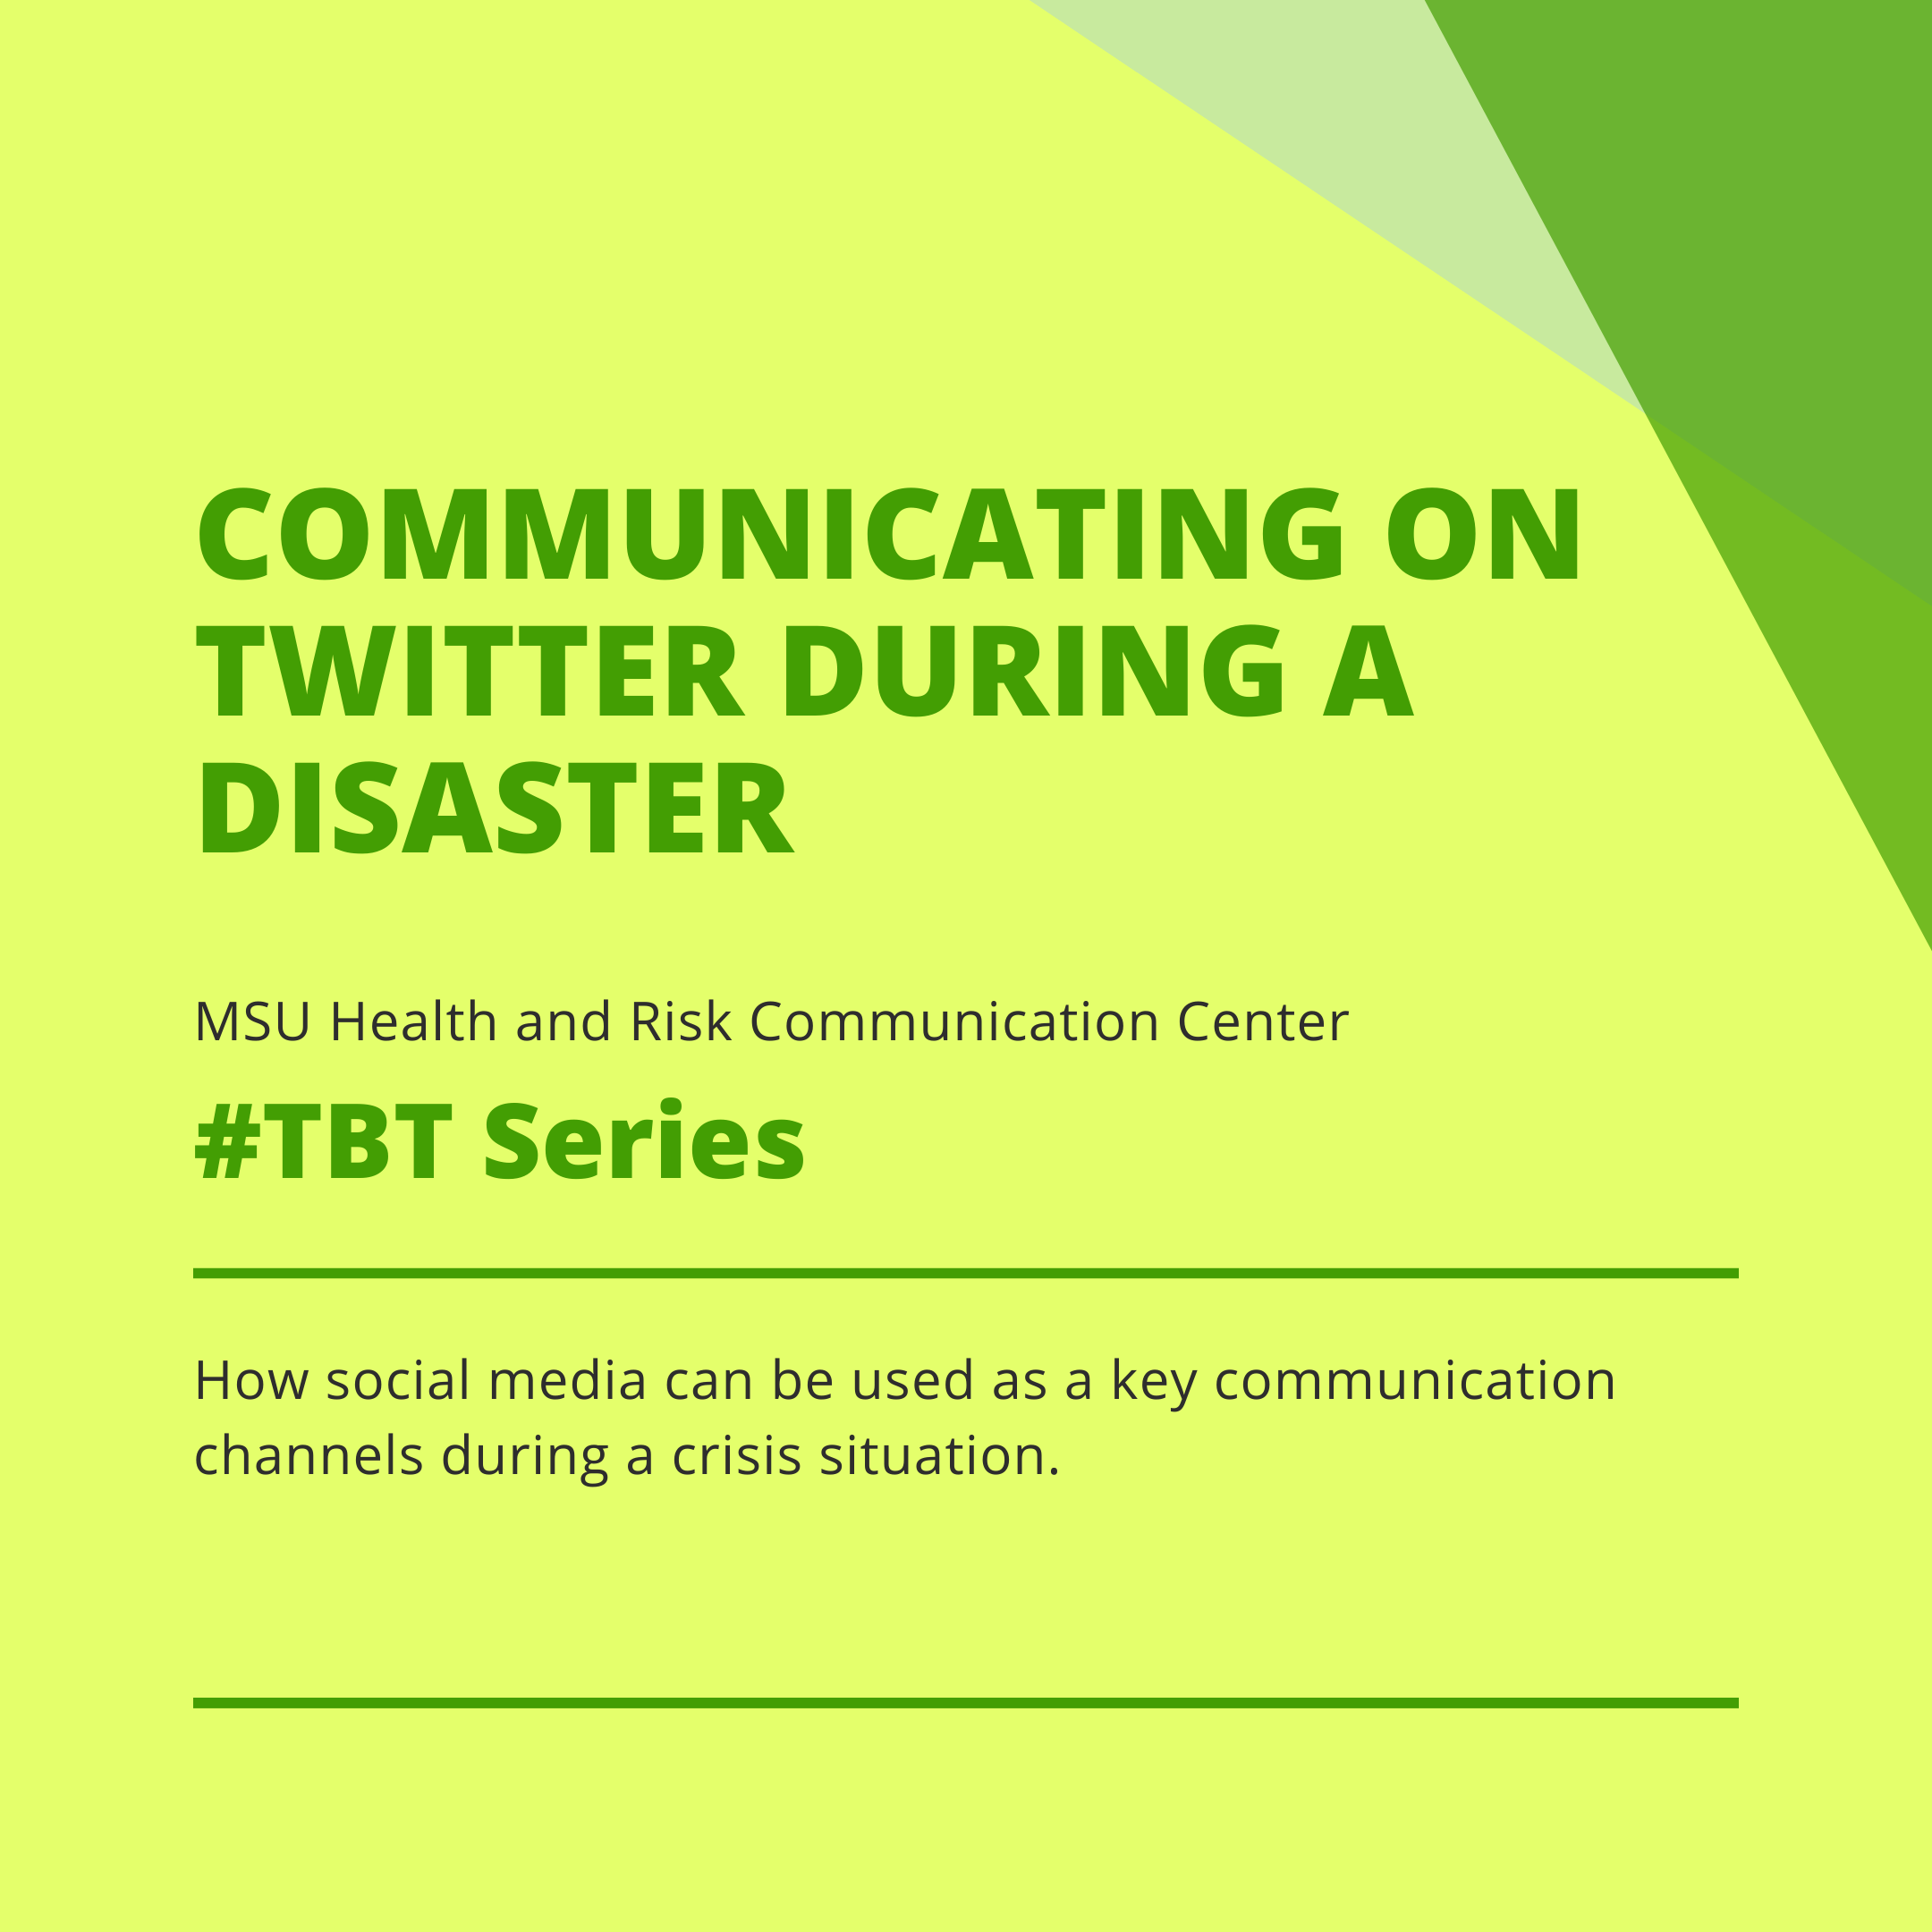 Communicating on Twitter during a disaster: An analysis of tweets during Typhoon Haiyan in the Philippines